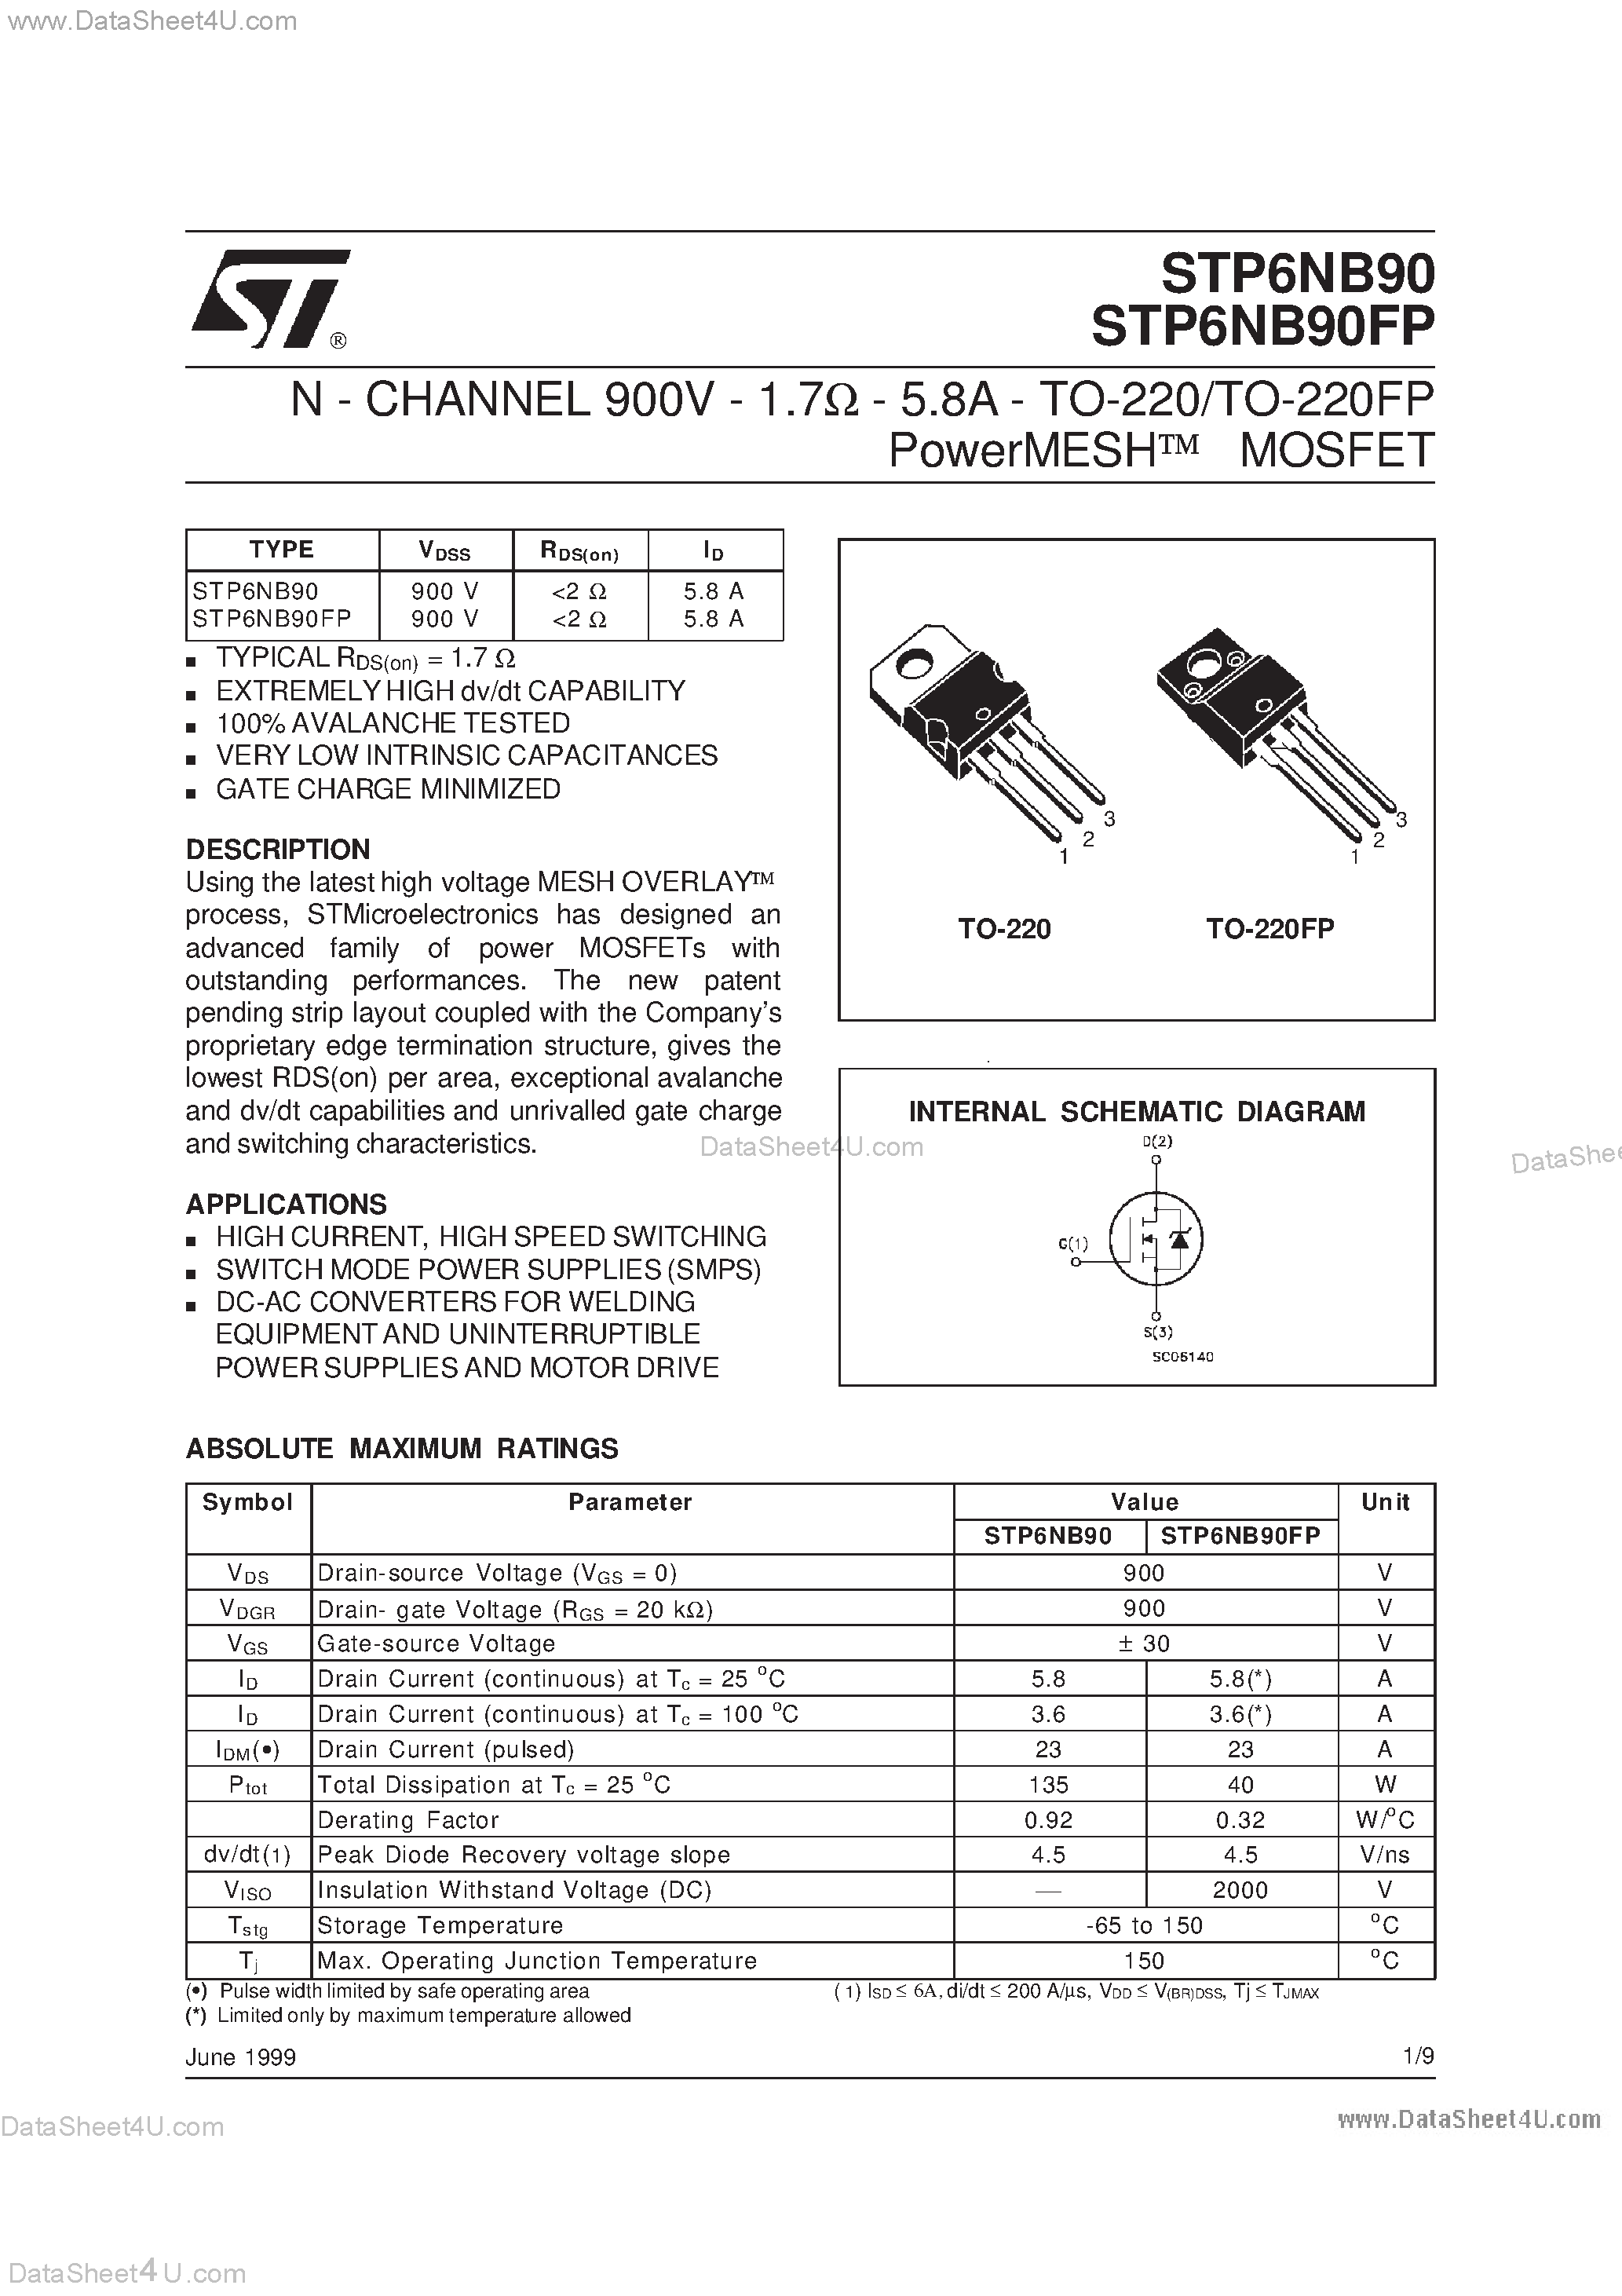 Datasheet STP6NB90 - N - CHANNEL 900V - 1.7ohm - 5.8A - TO-220/TO-220FP PowerMESH MOSFET page 1